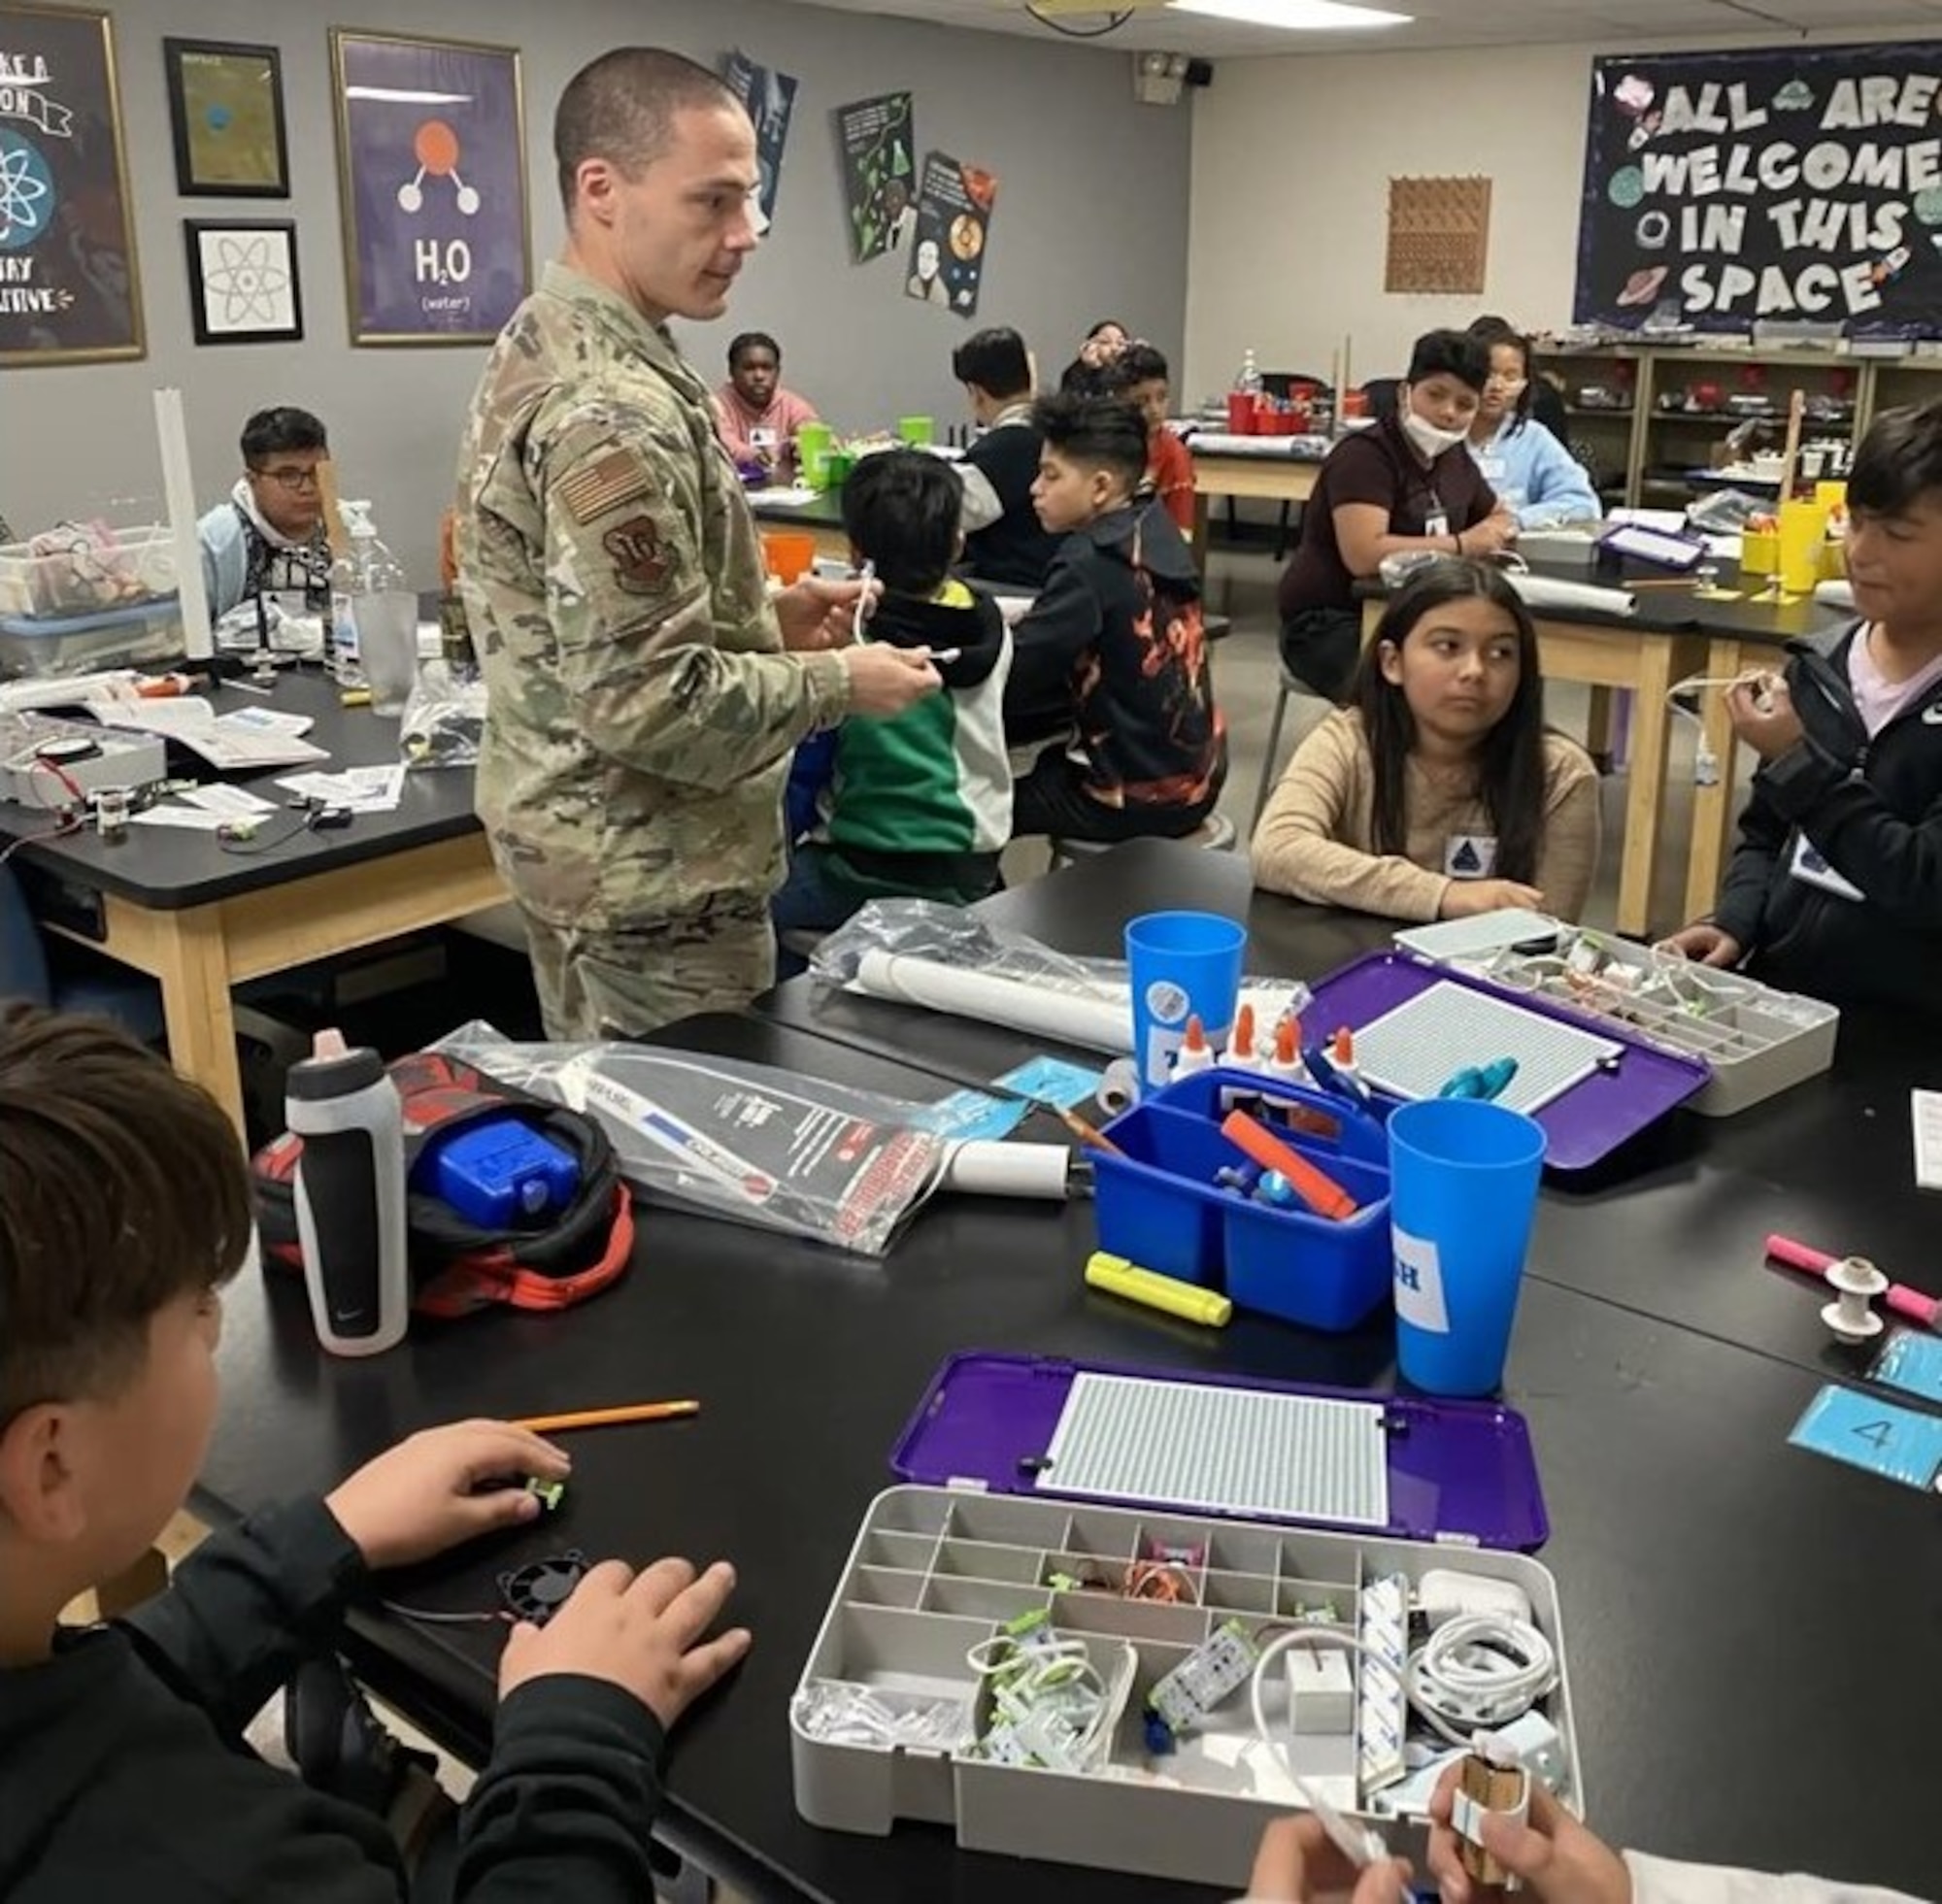 Technical Sgt. Jeremiah “Bulldog” Loop, 16th AF, NCOIC, Information Warfare Capabilities, mentors local Southwest ISD students on STEM-related topics while volunteering with the Starbase Kelly Leaders Influencing the Future through Teaching program. The LIFT Program, bridges military partners with San Antonio area students.